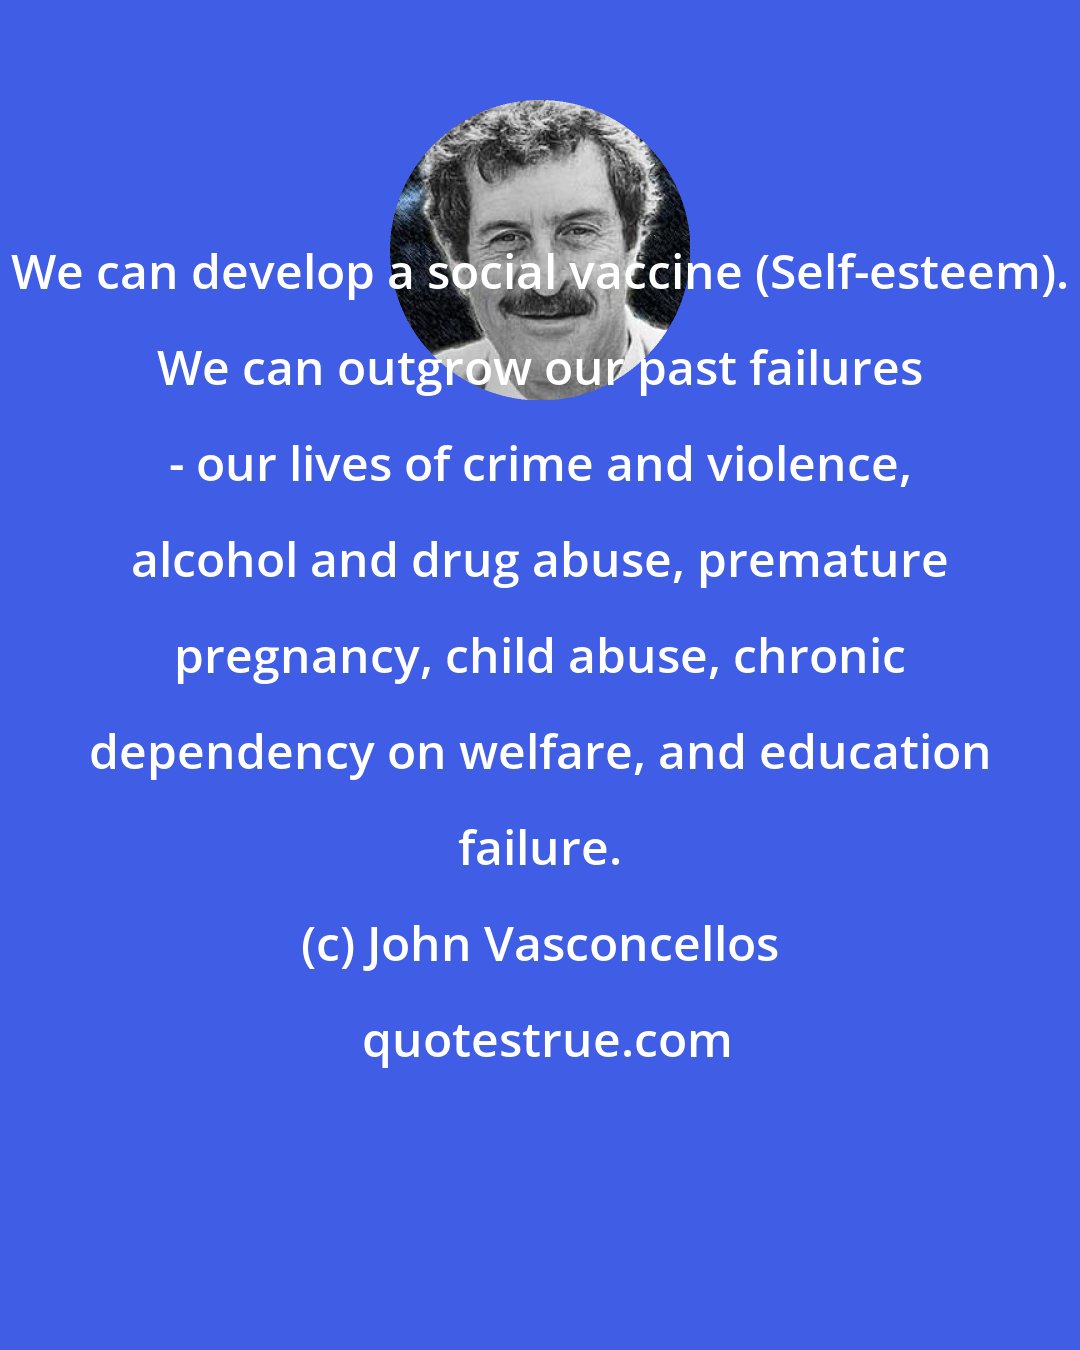 John Vasconcellos: We can develop a social vaccine (Self-esteem). We can outgrow our past failures - our lives of crime and violence, alcohol and drug abuse, premature pregnancy, child abuse, chronic dependency on welfare, and education failure.